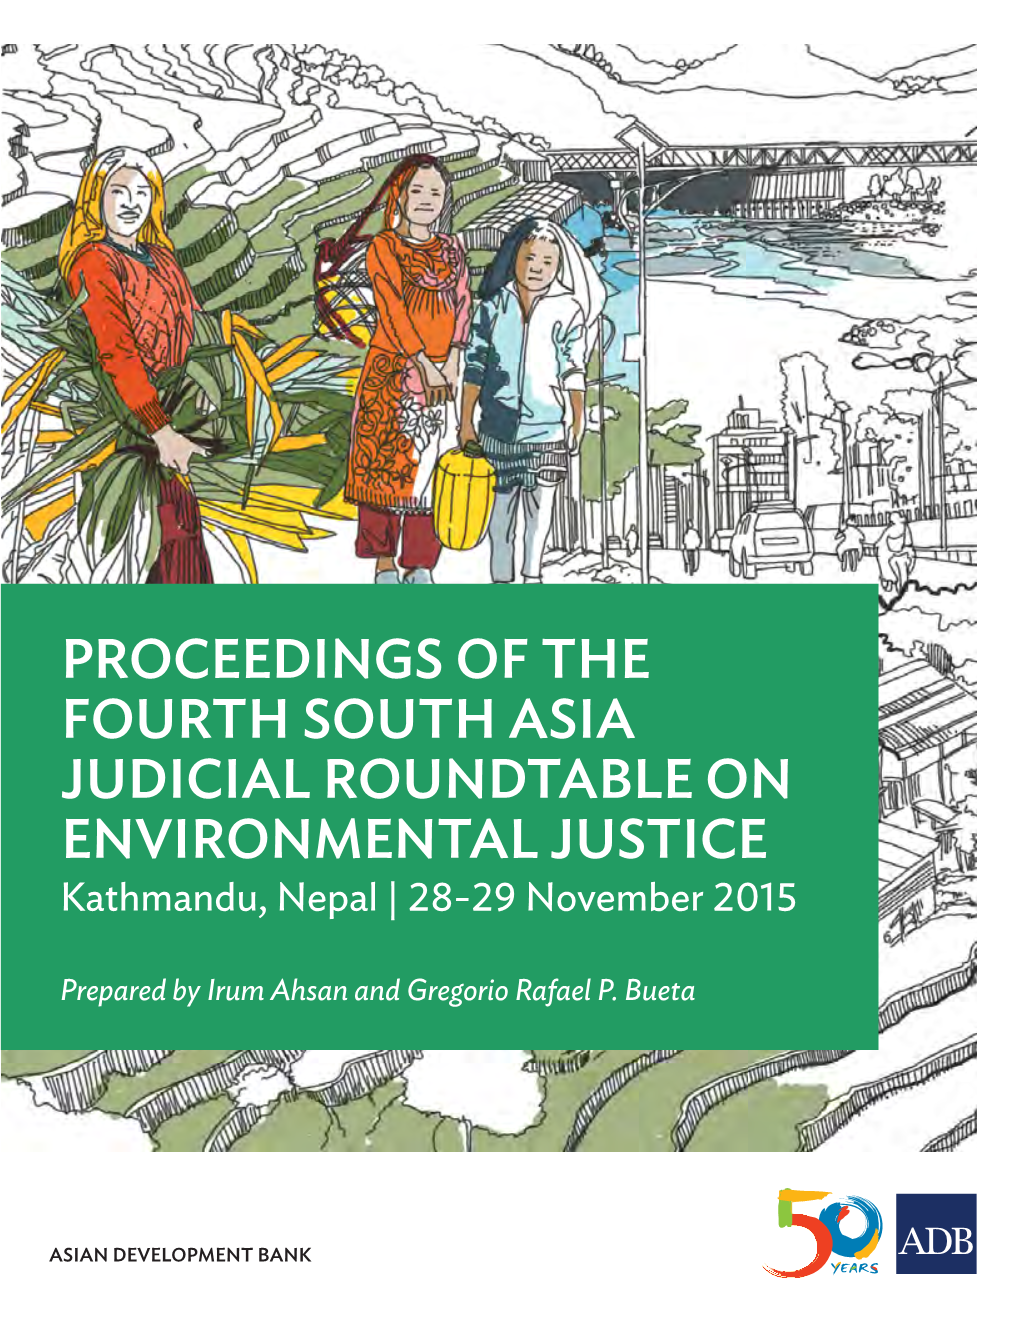 PROCEEDINGS of the FOURTH SOUTH ASIA JUDICIAL ROUNDTABLE on ENVIRONMENTAL JUSTICE Kathmandu, Nepal | 28-29 November 2015